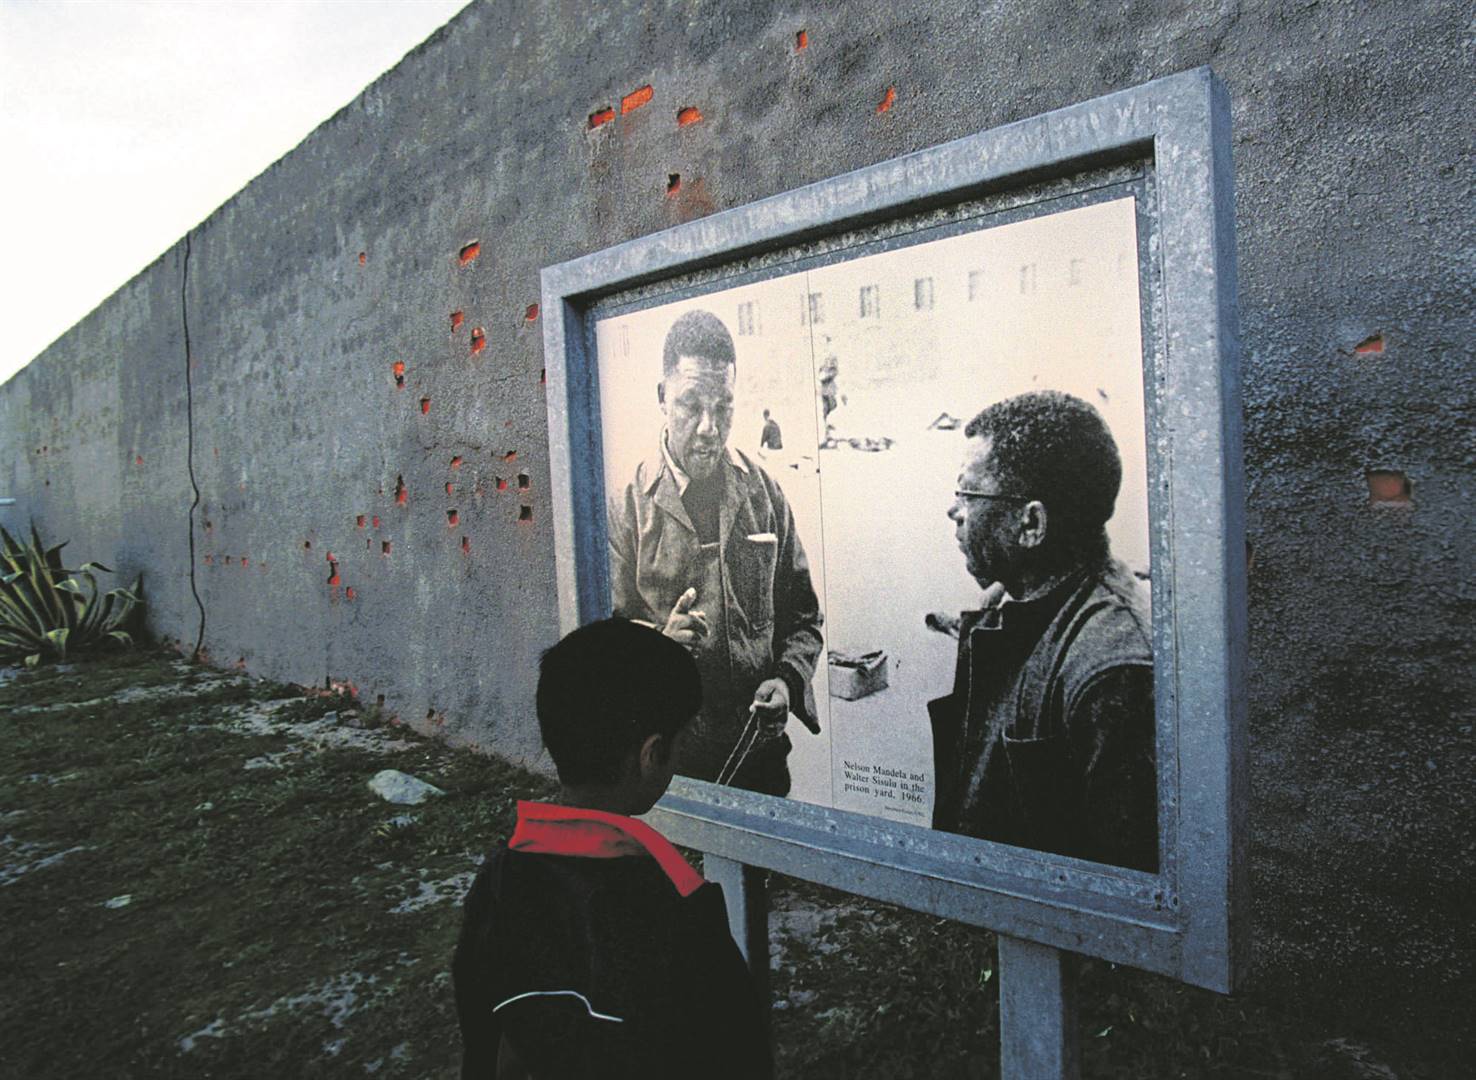 A young boy stands in front of a plaque in the main courtyard area of the prison on Robben Island. Photo: Antoine de Ras